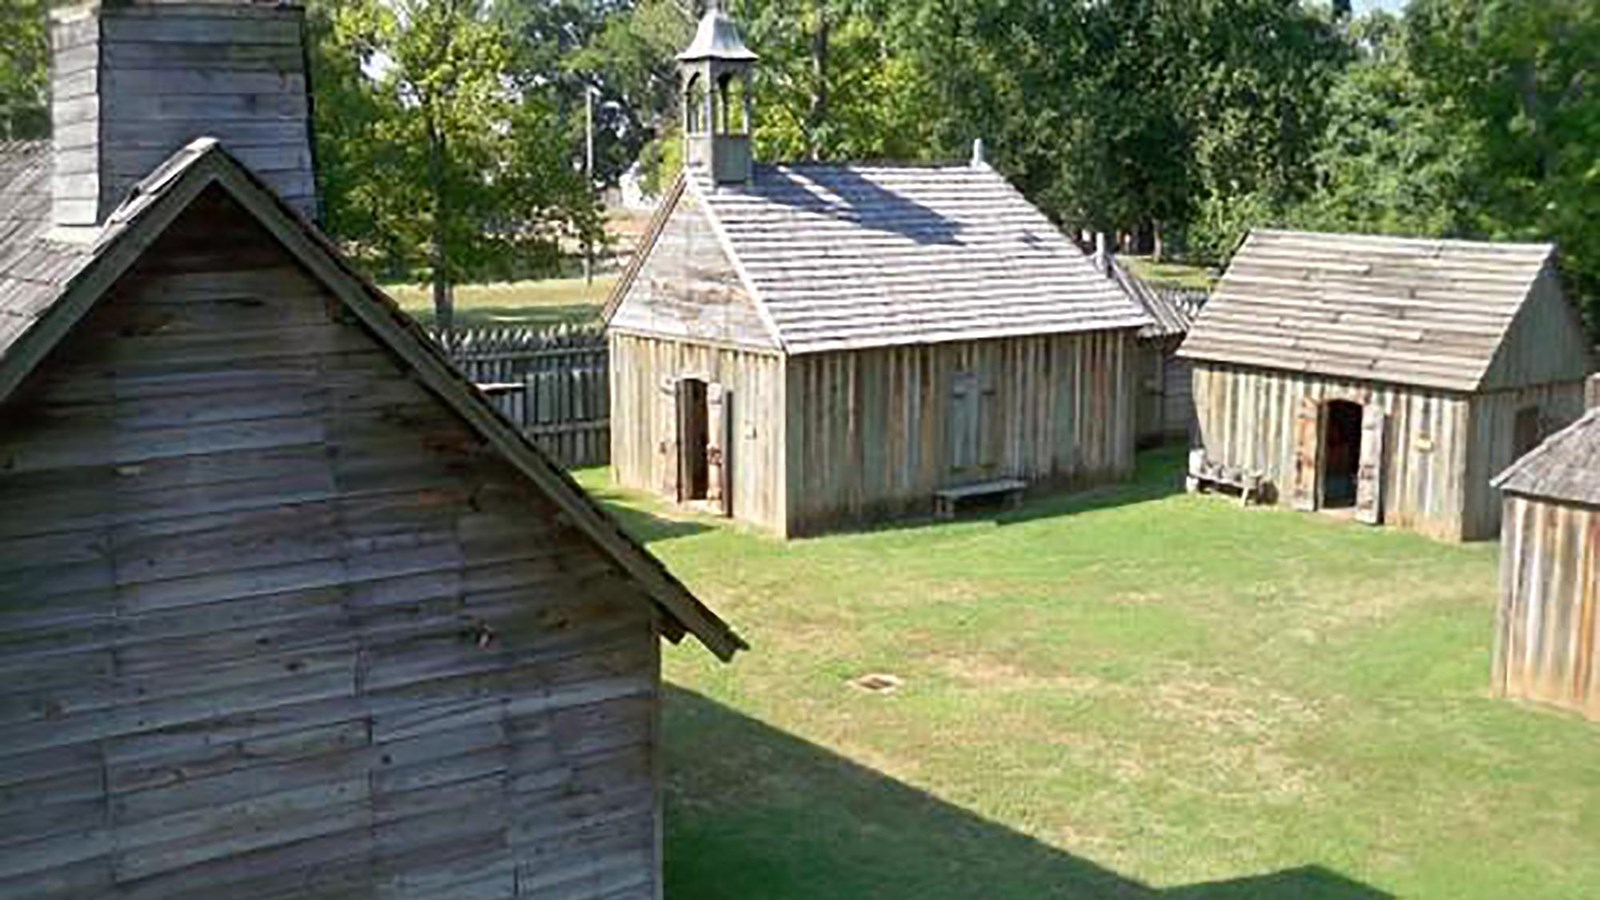 A historic fort with multiple wooden buildings.